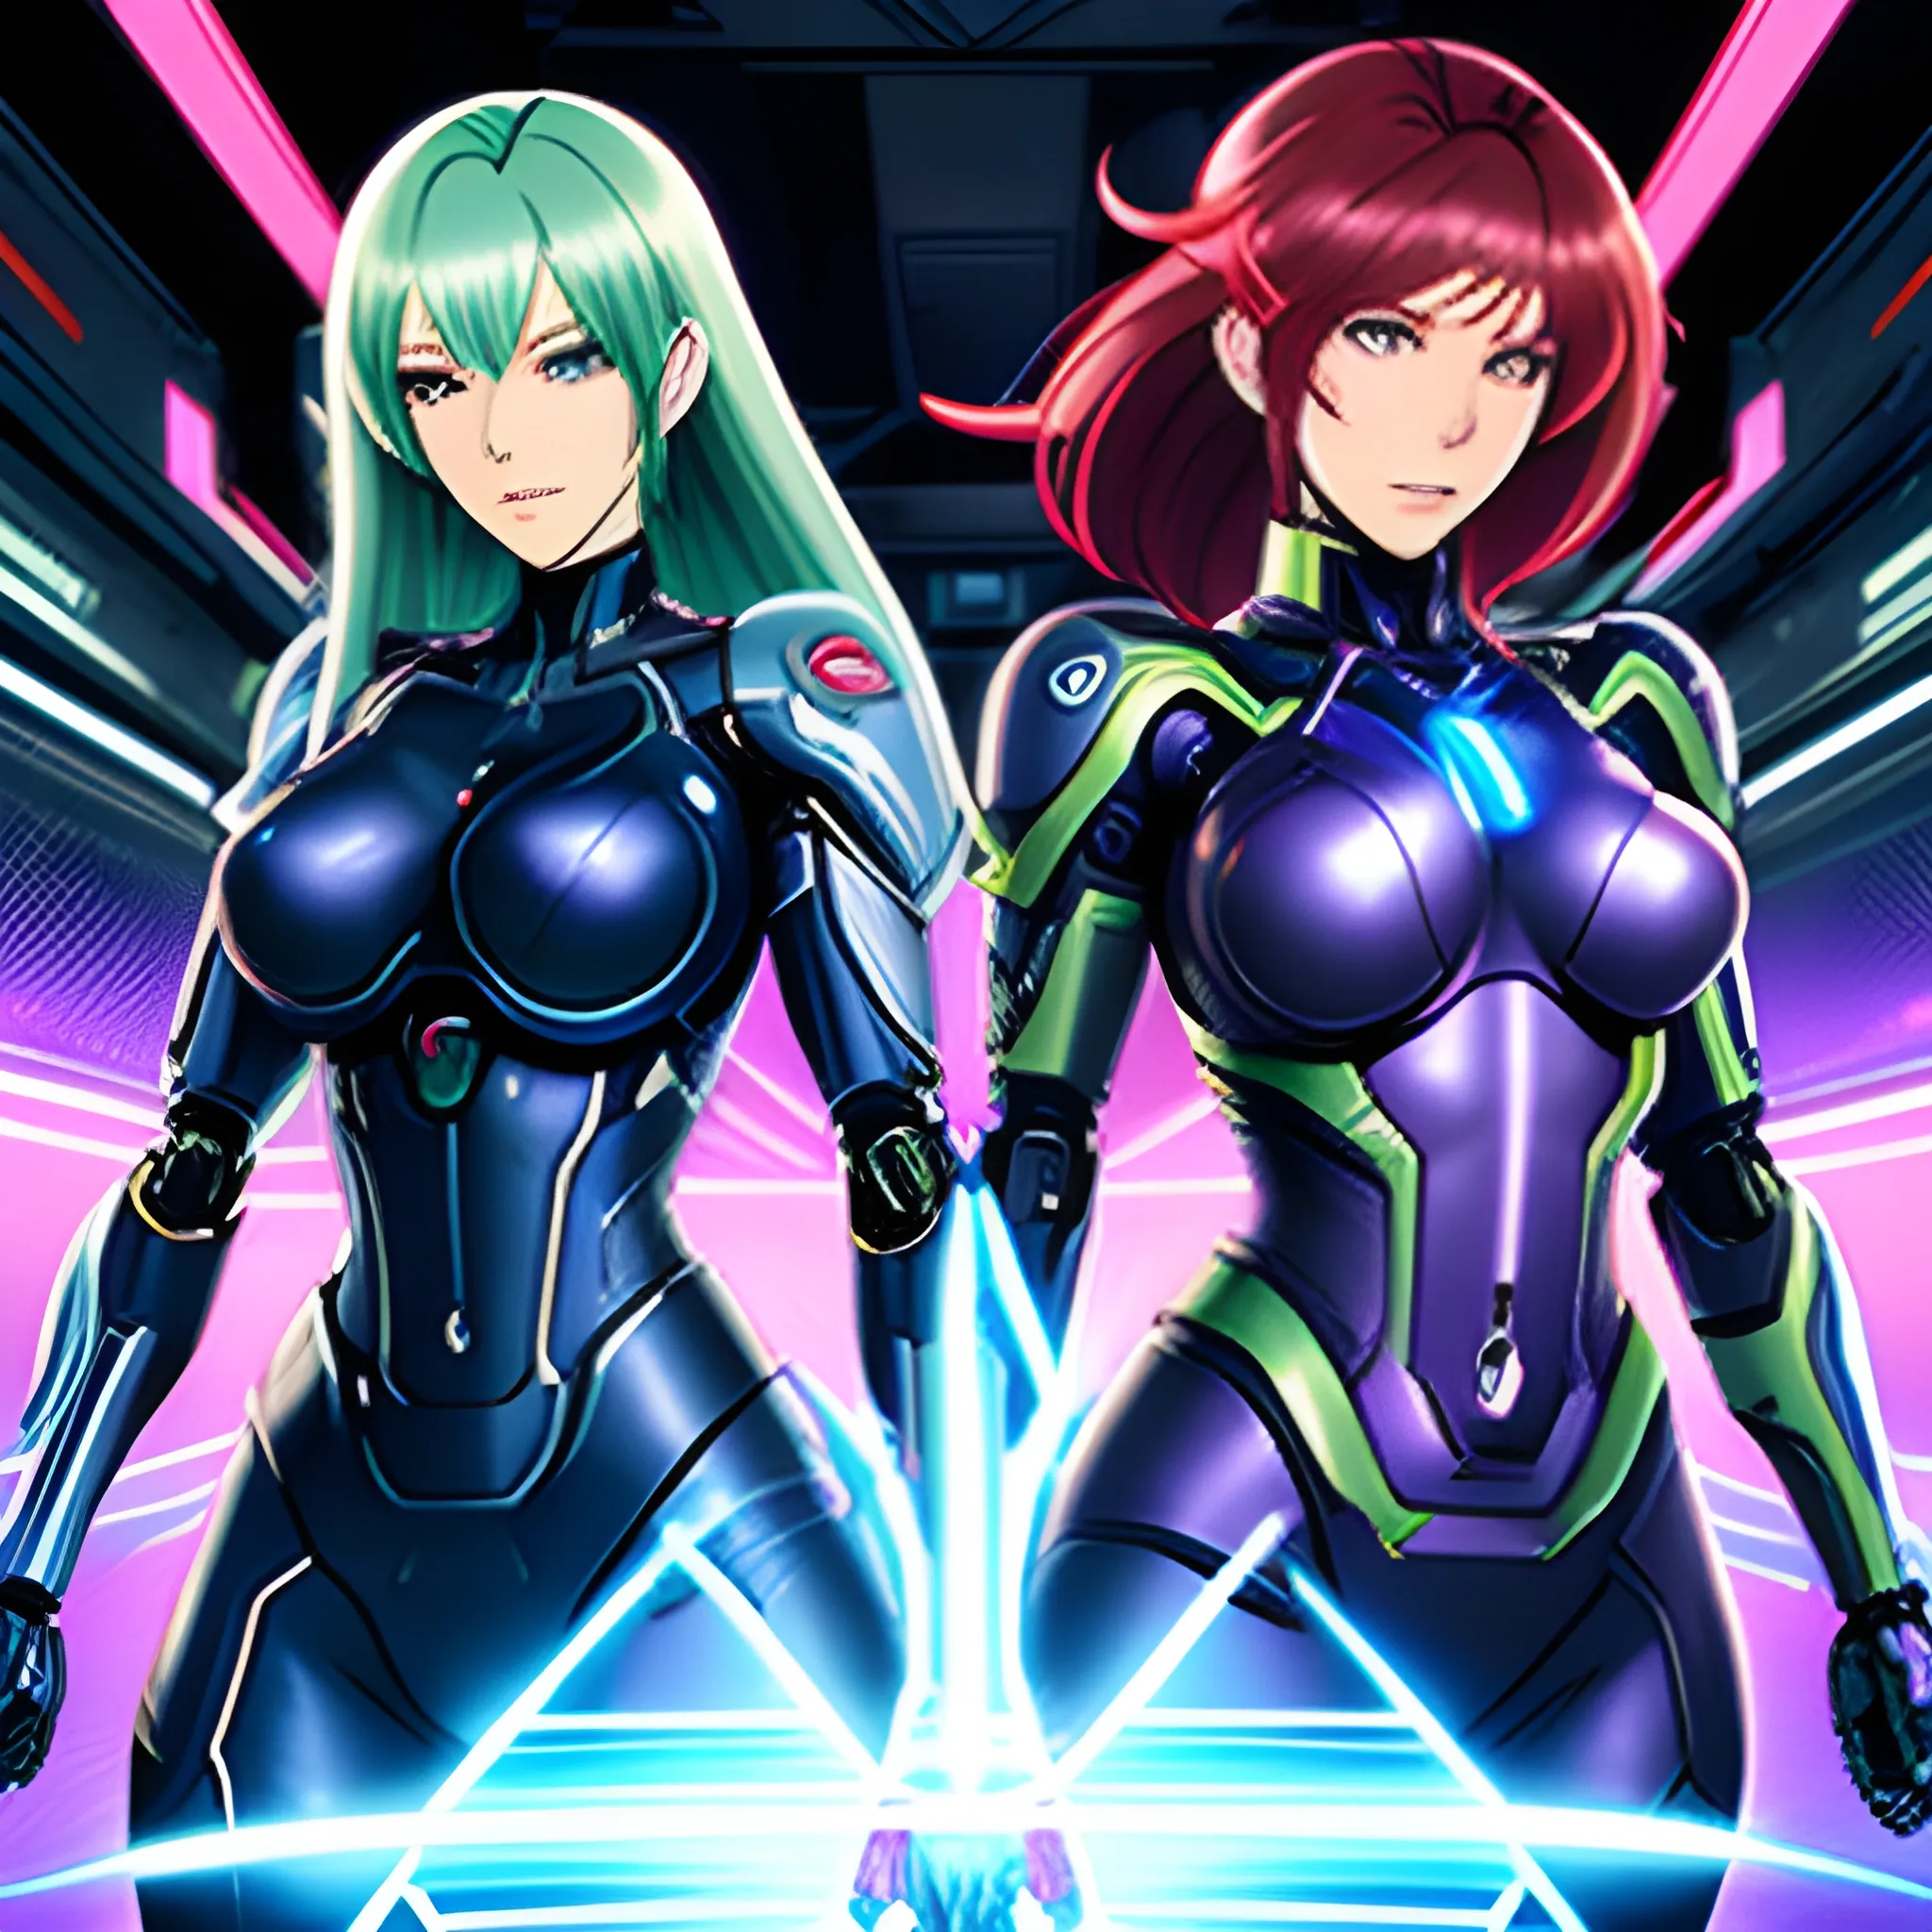 In a futuristic classroom, two anime girls with cybernetic enhancements engage in a high-tech battle, their weapons and abilities creating a stunning display of light and color.